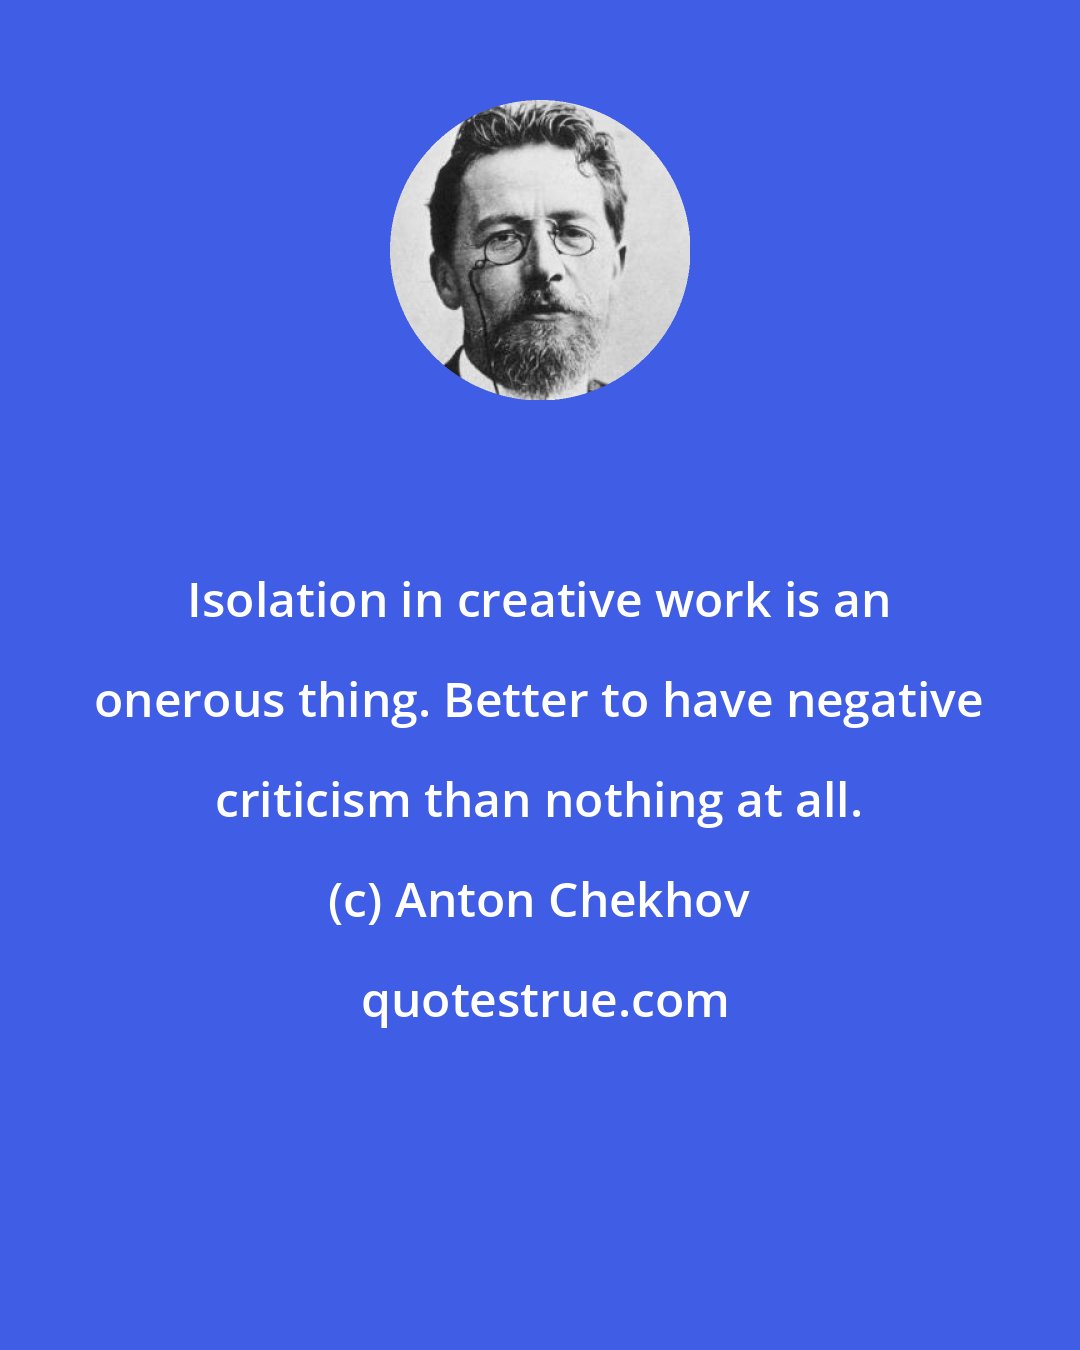 Anton Chekhov: Isolation in creative work is an onerous thing. Better to have negative criticism than nothing at all.